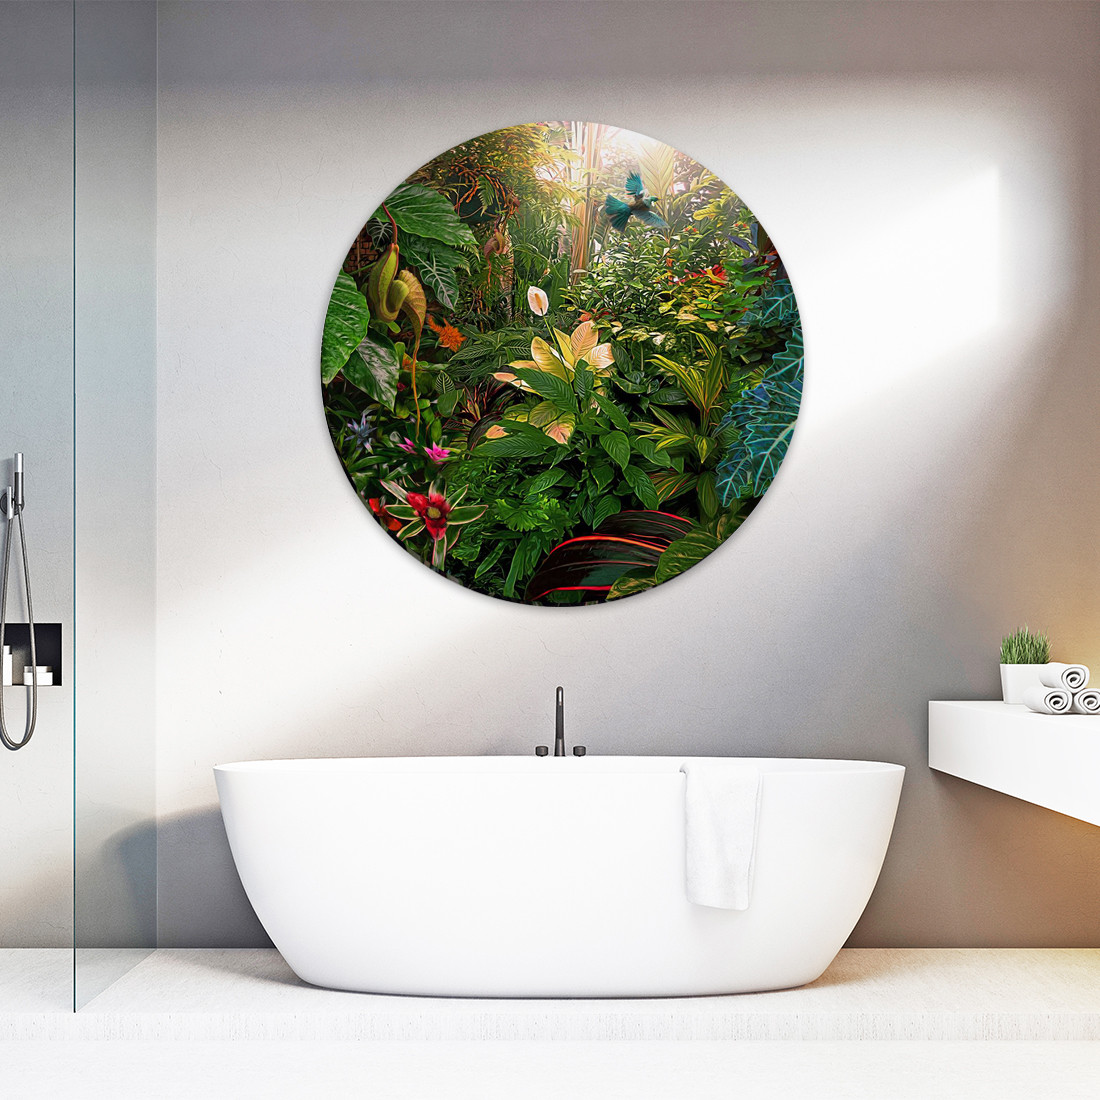 Earthly Delights' 500mm to 1200mm dia. circular aluminium or glass bathroom  art - Creative NZ photography & art by Lucy G